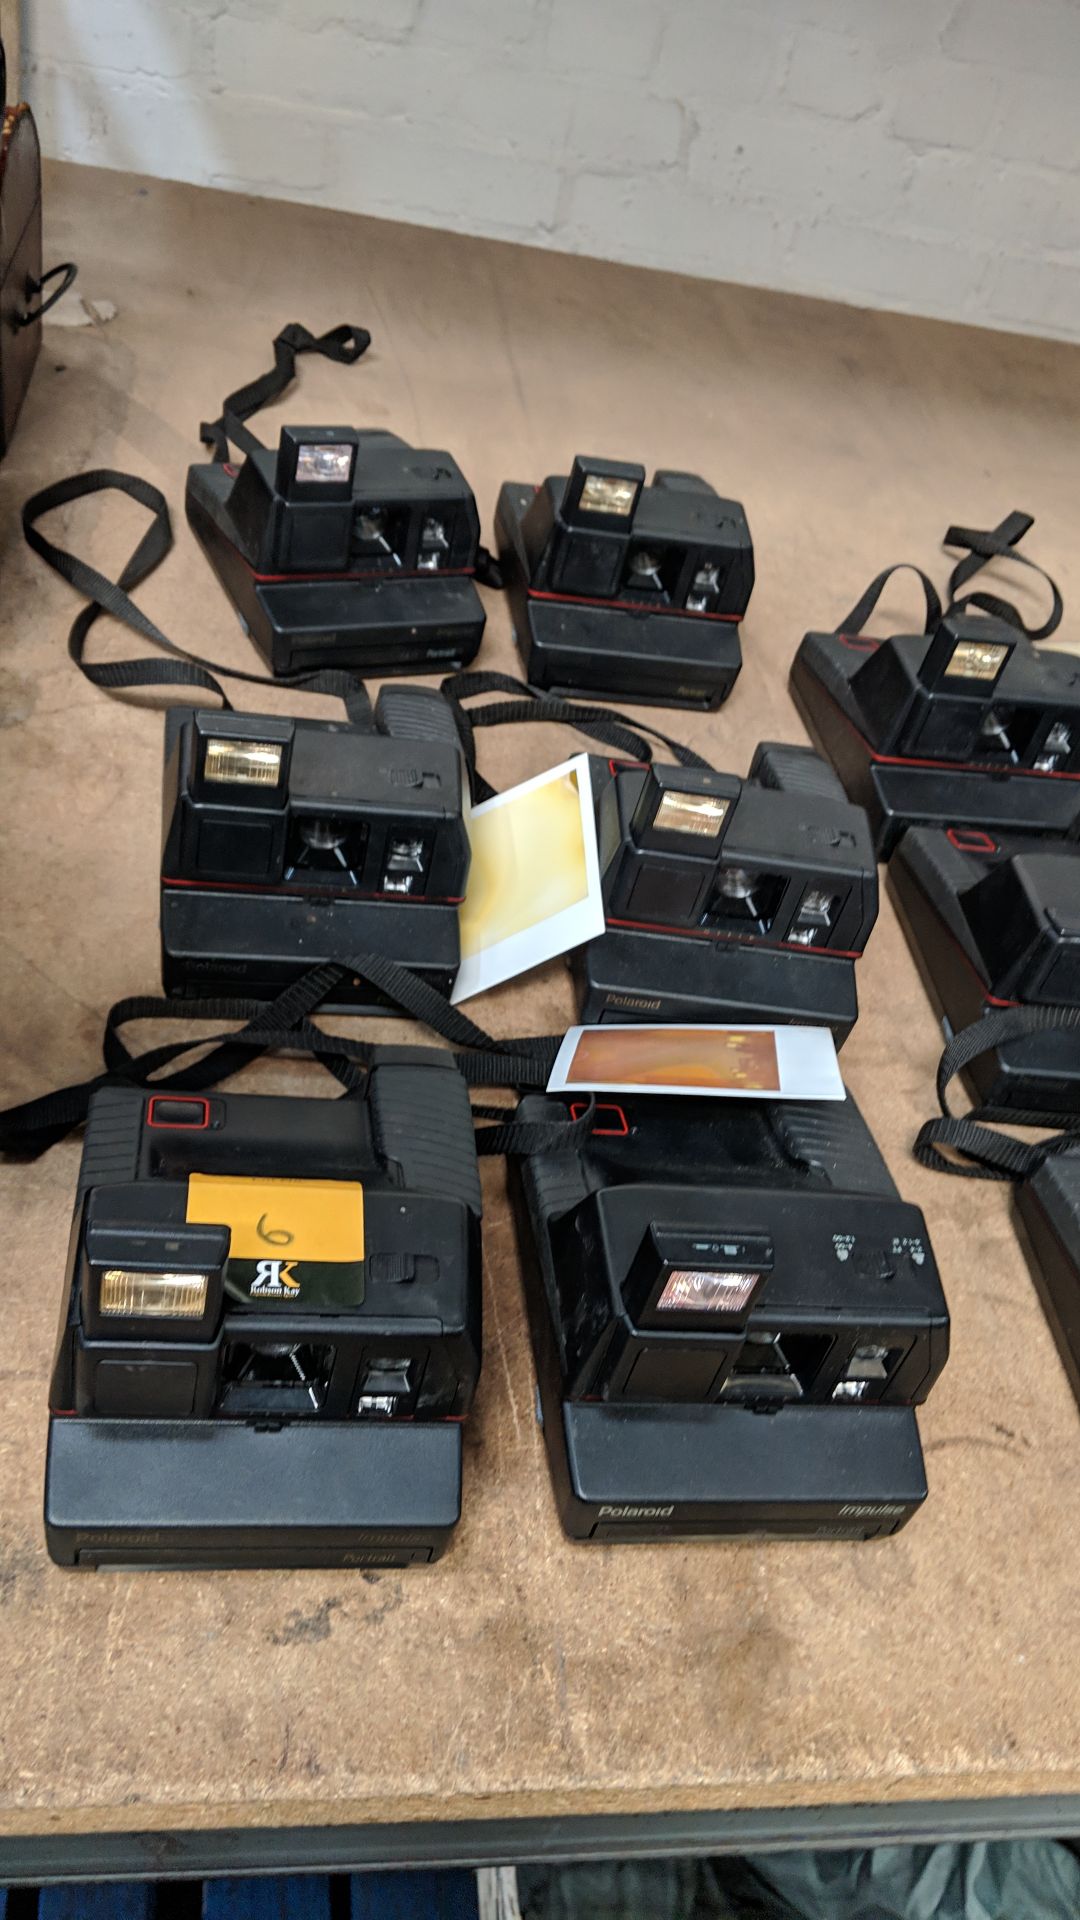 6 off Polaroid Impulse cameras IMPORTANT: Please remember goods successfully bid upon must be paid